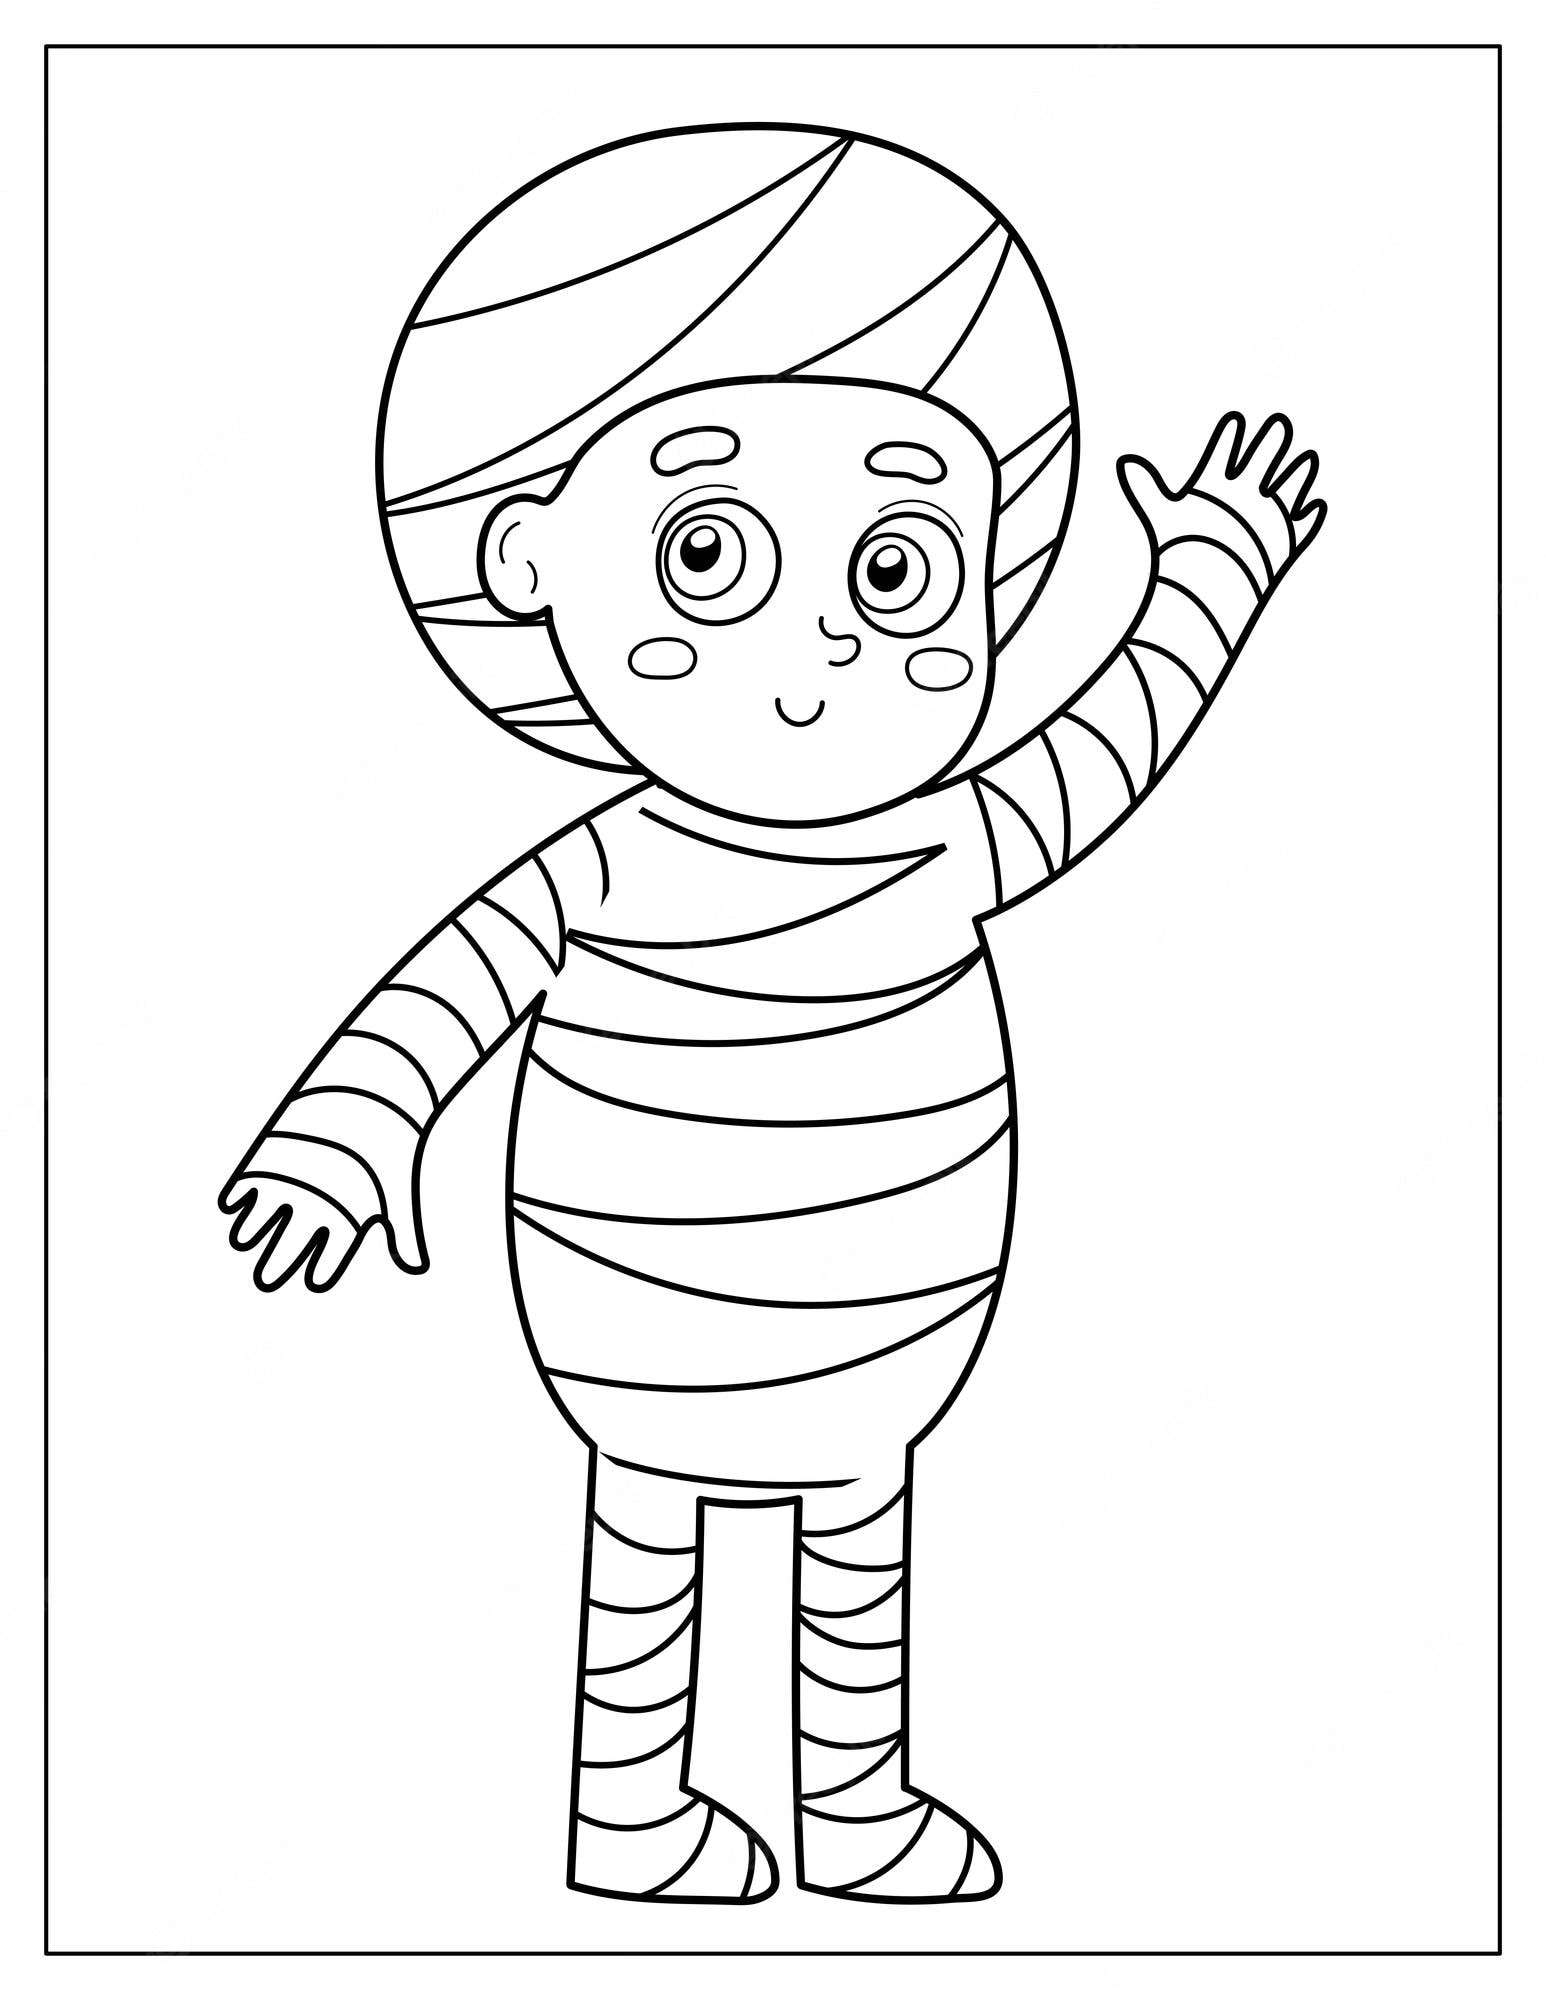 Premium Vector | Boy in mummy costume coloring page for kids. halloween kid  waving hand in cartoon style for coloring